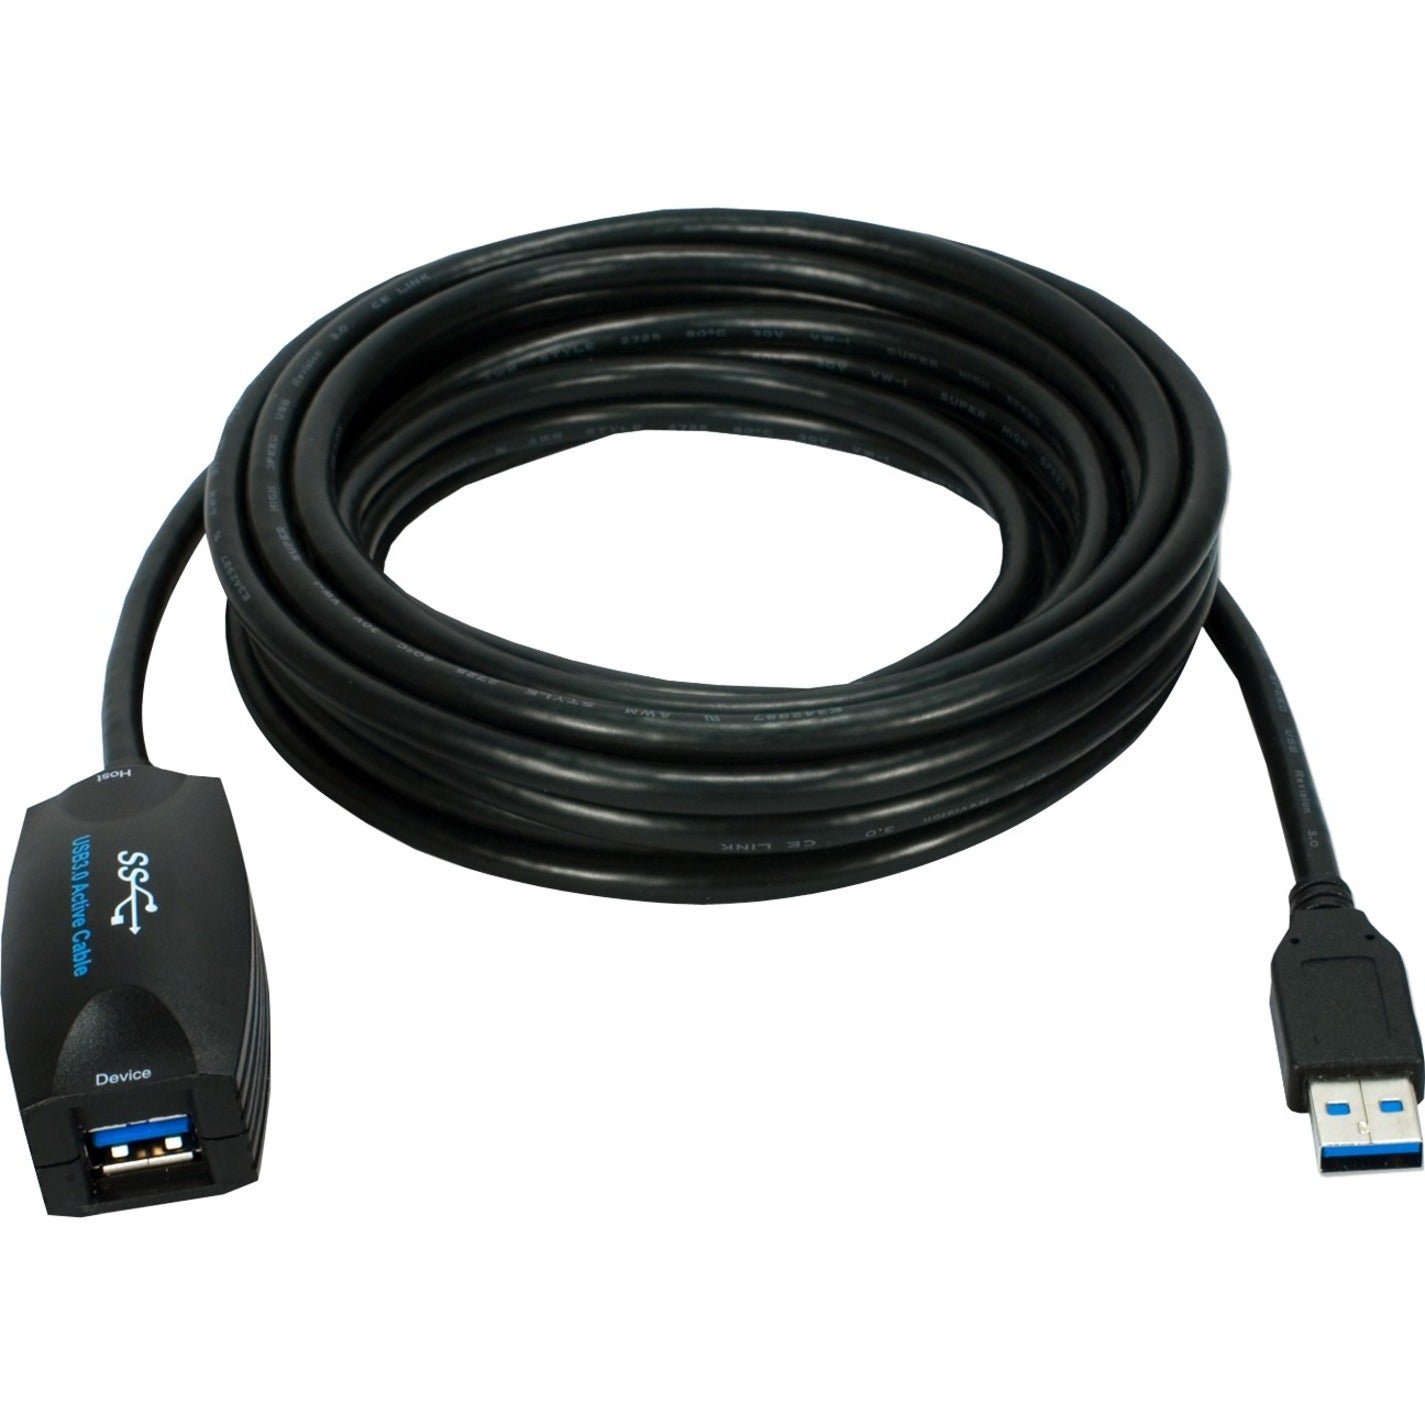 QVS USB3-RPTR USB 3.0 5Gbps Active Extension Cable, 16 ft, Repeater